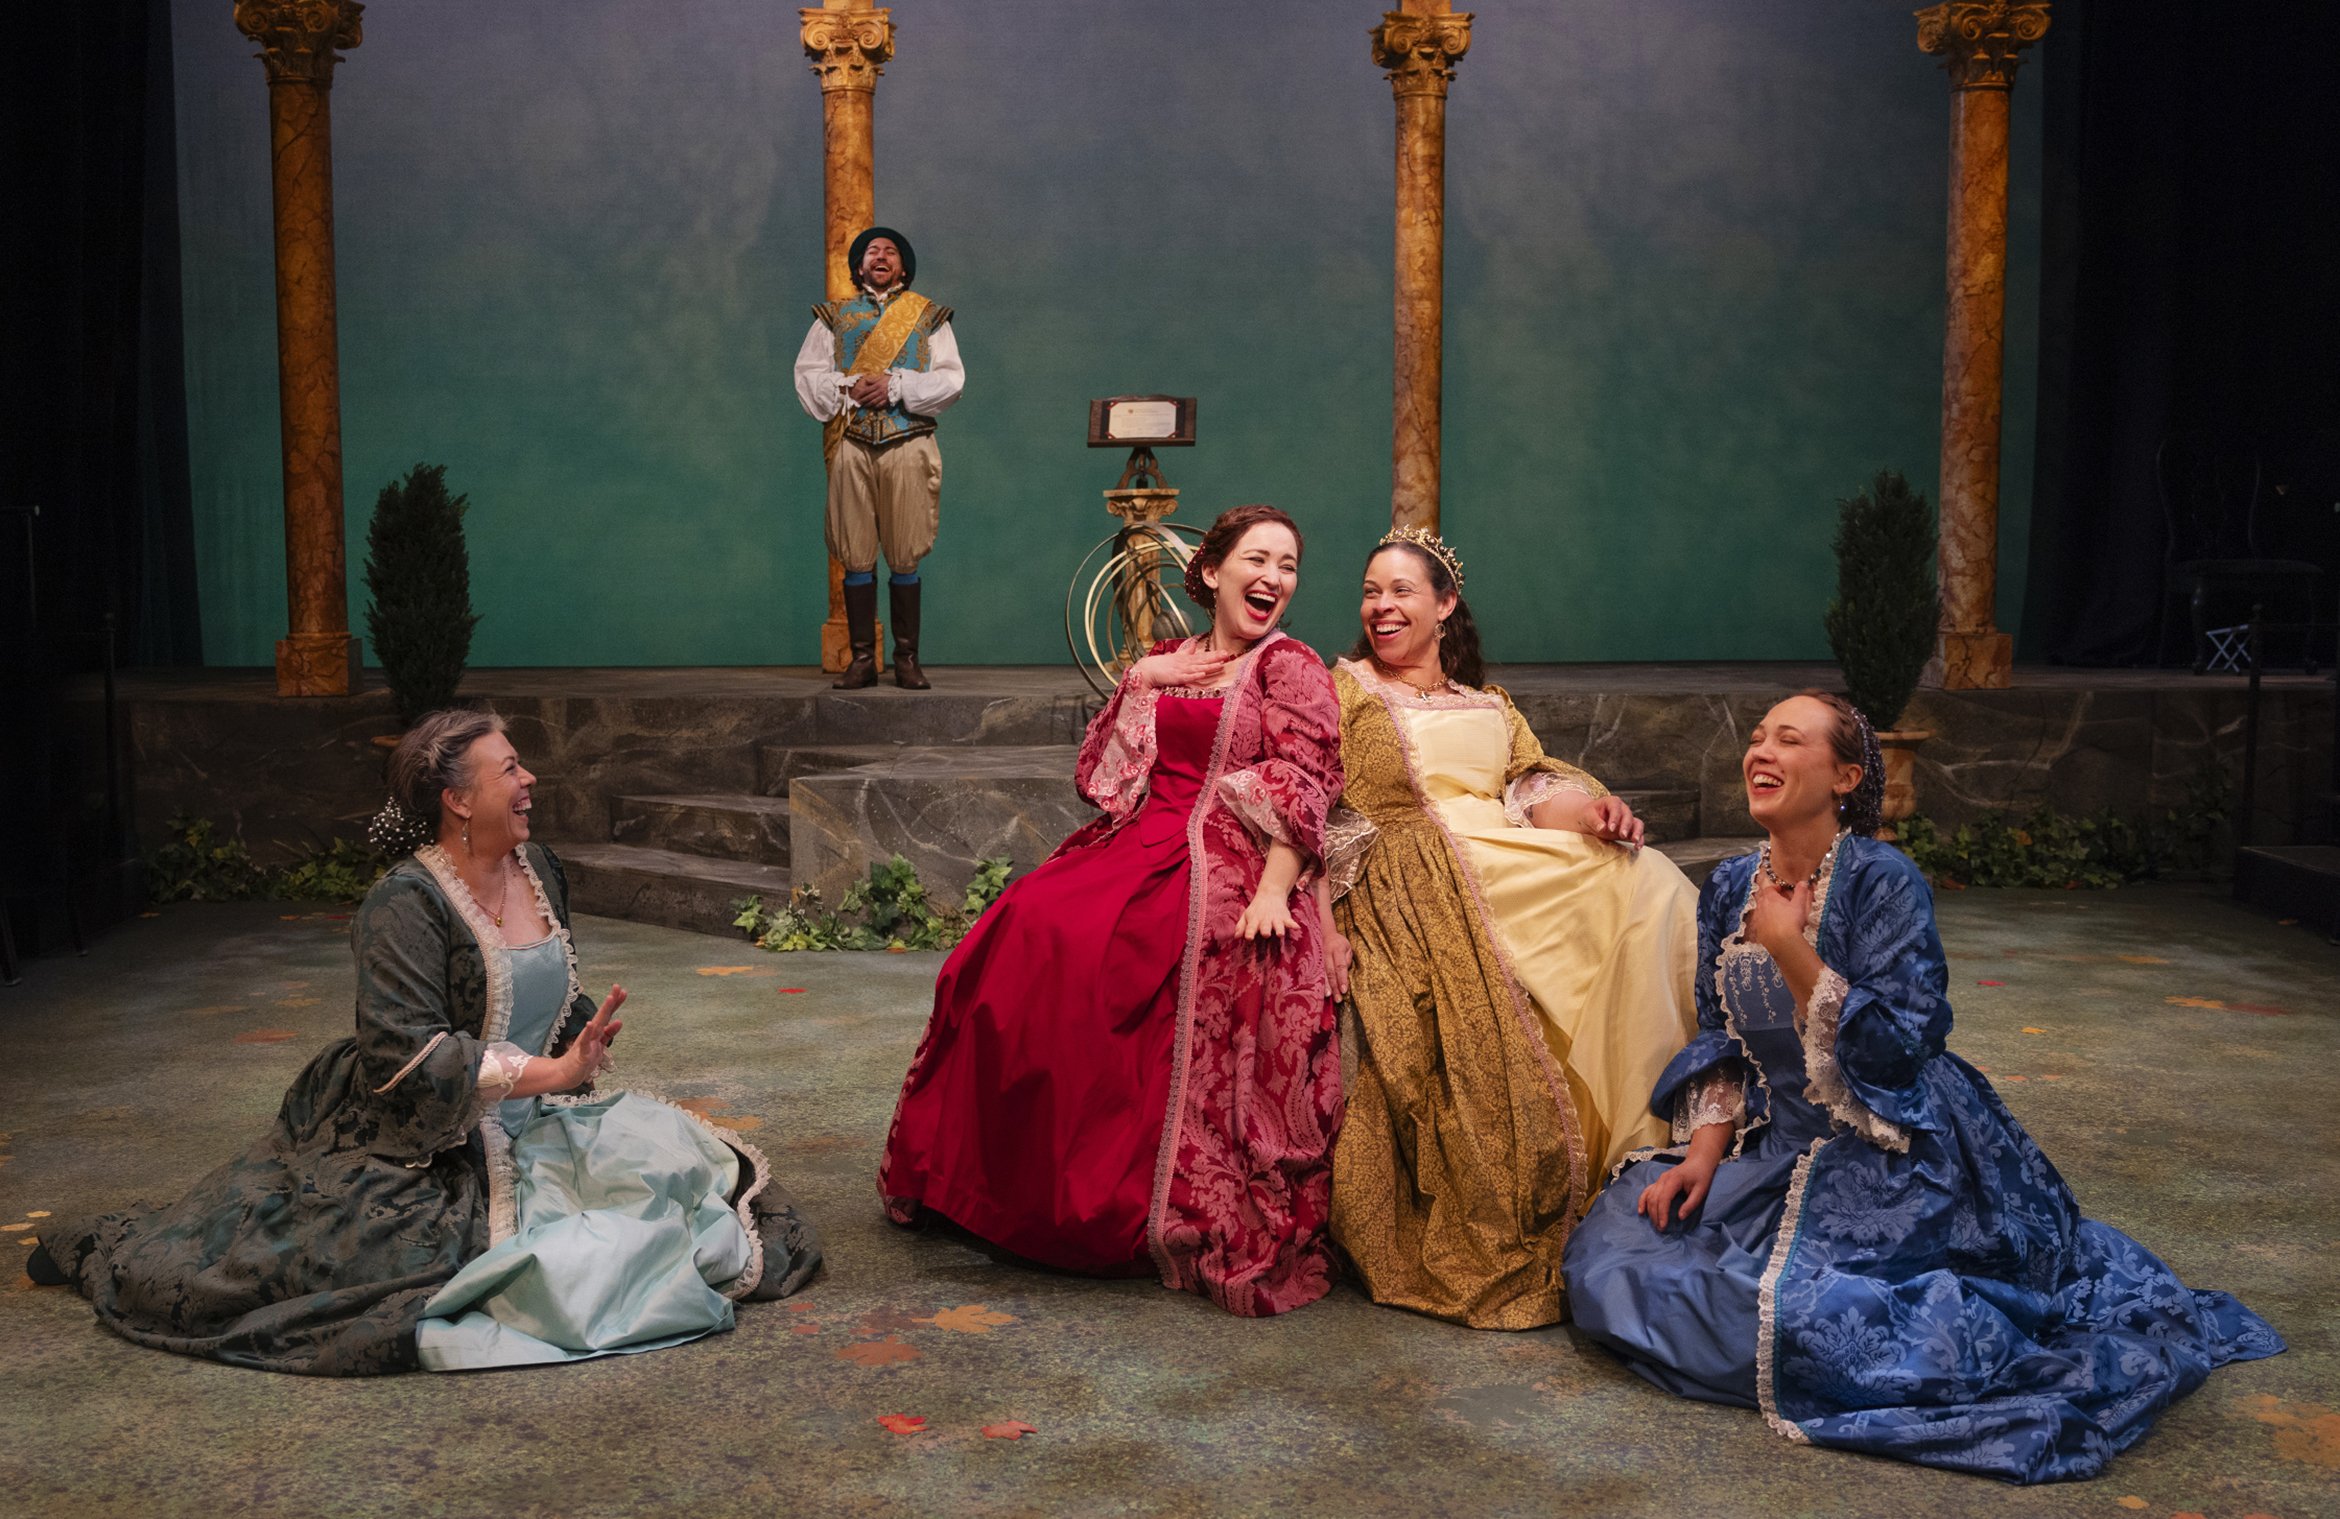 The ladies of the French court. Photo by Tim Fuller.